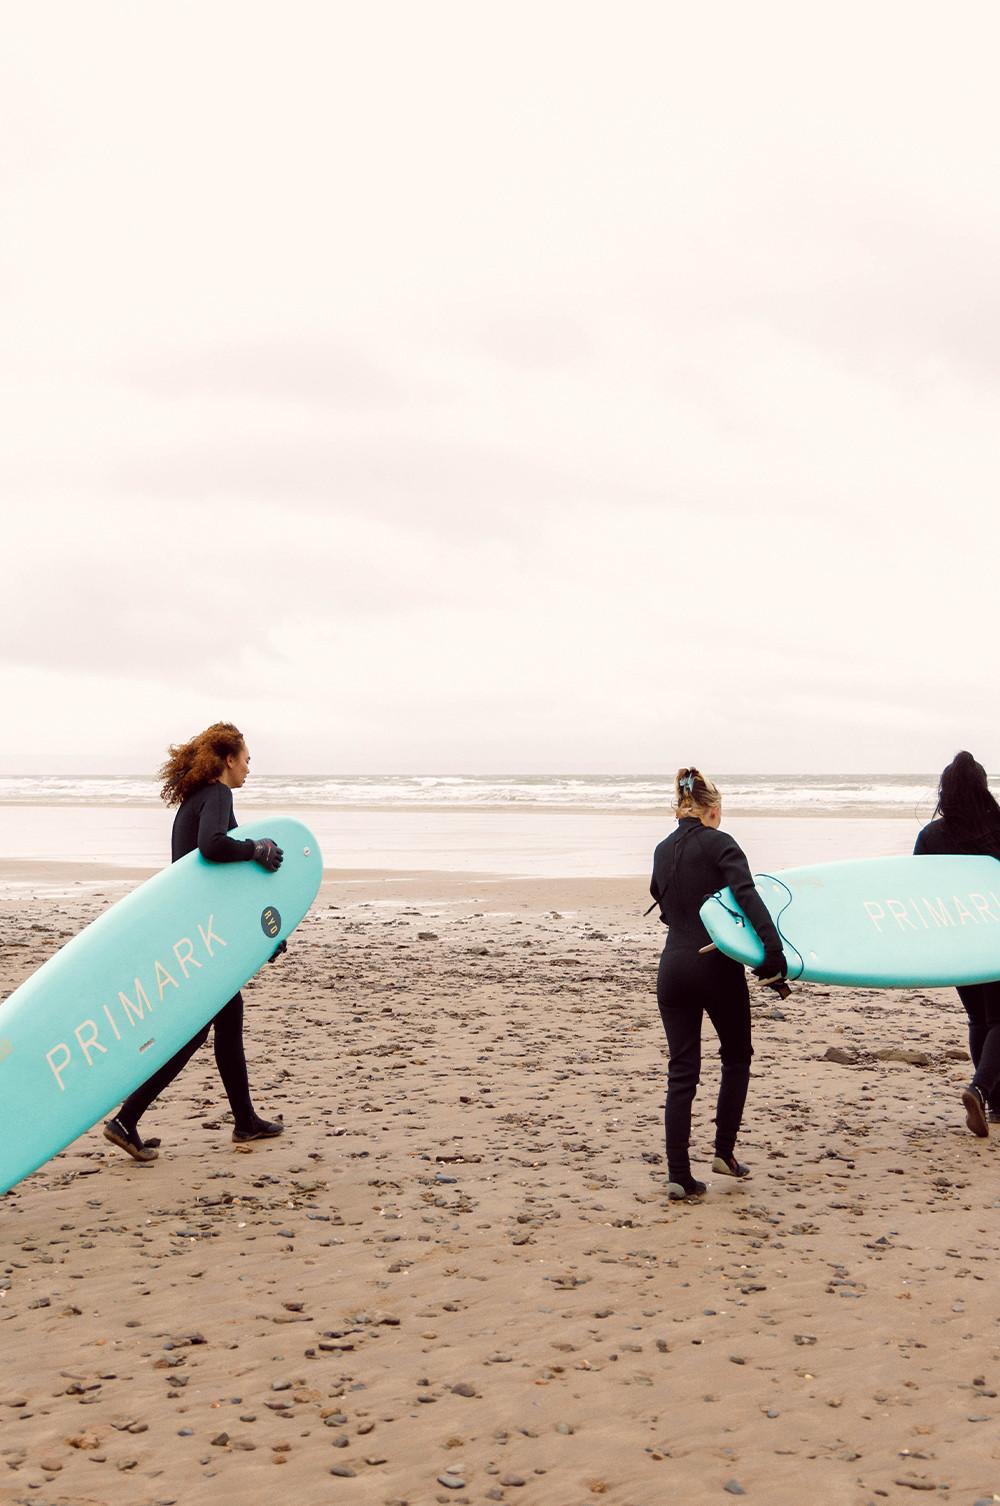 Influencers walking on the beach with Primark surf boards